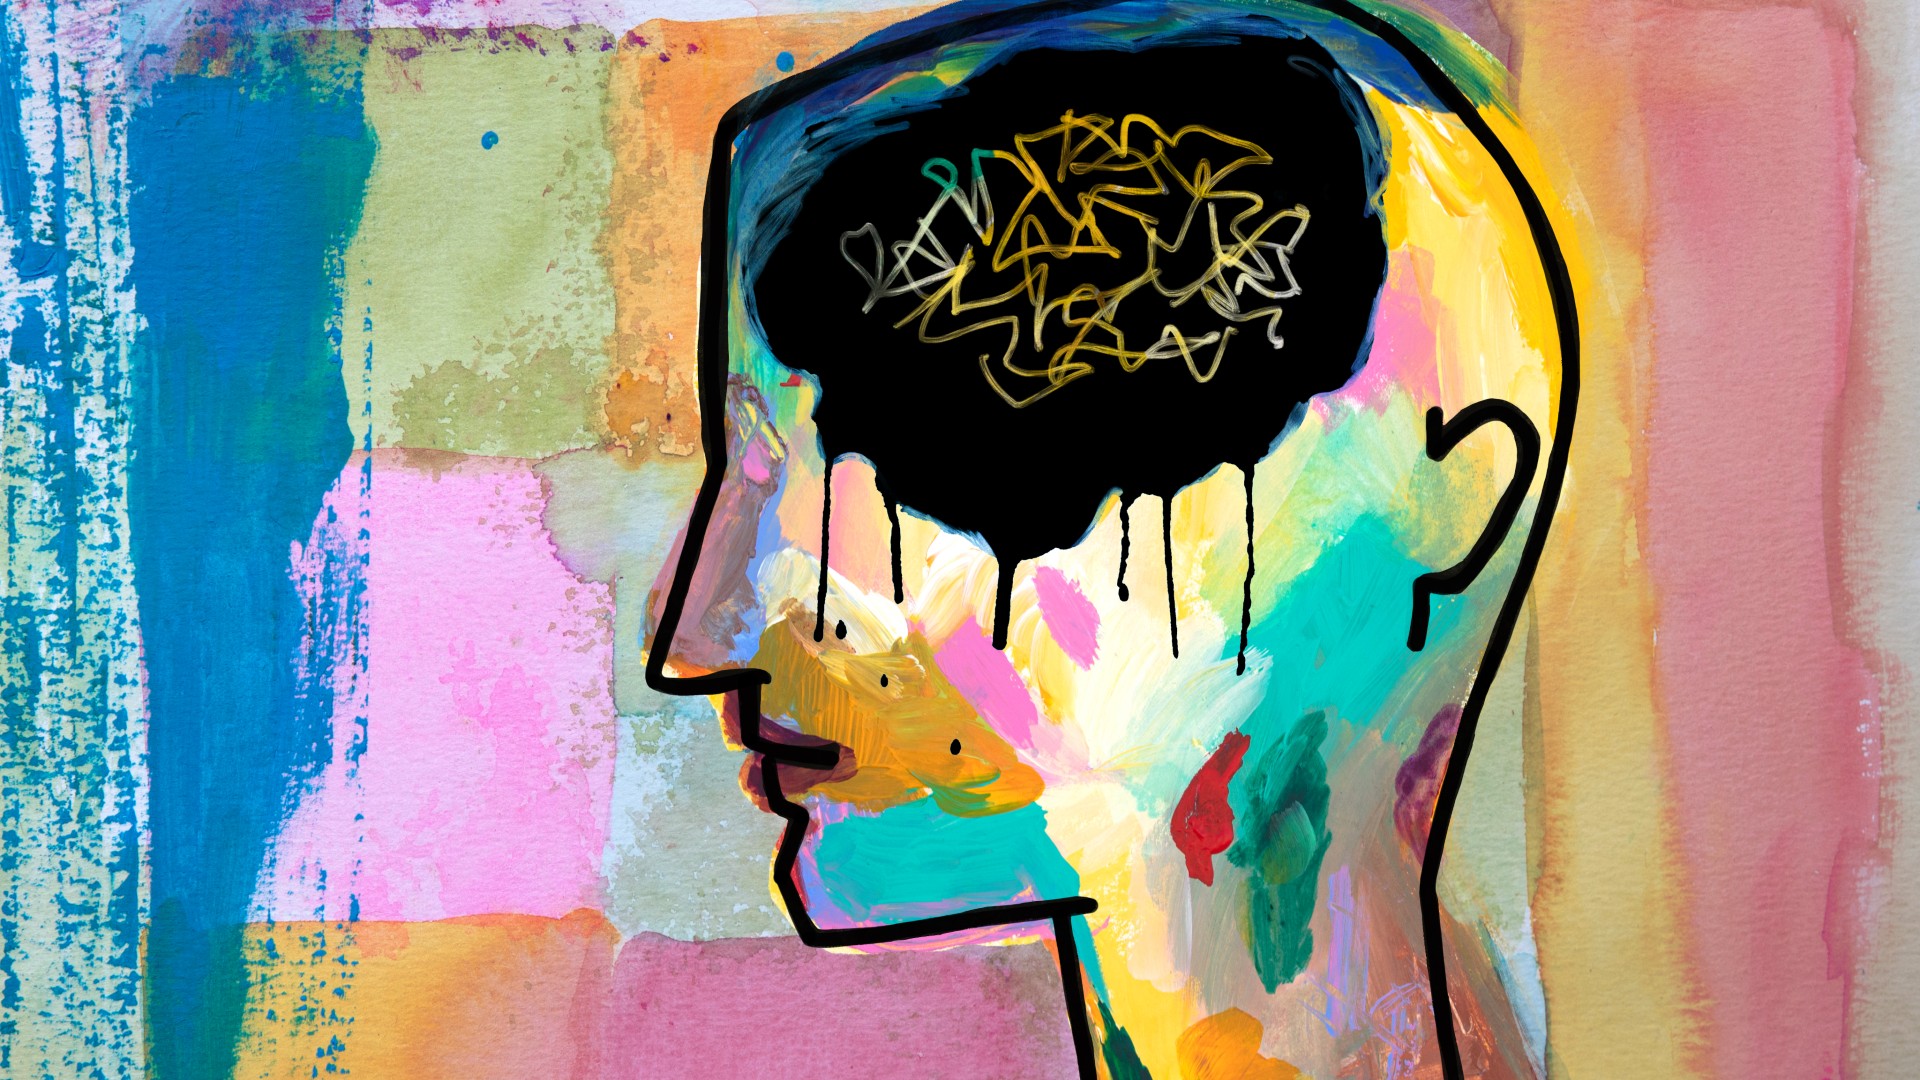 A colorful conceptual image showing the outline of a person's head with their brain colored black and dripping like paint to symbolize pain